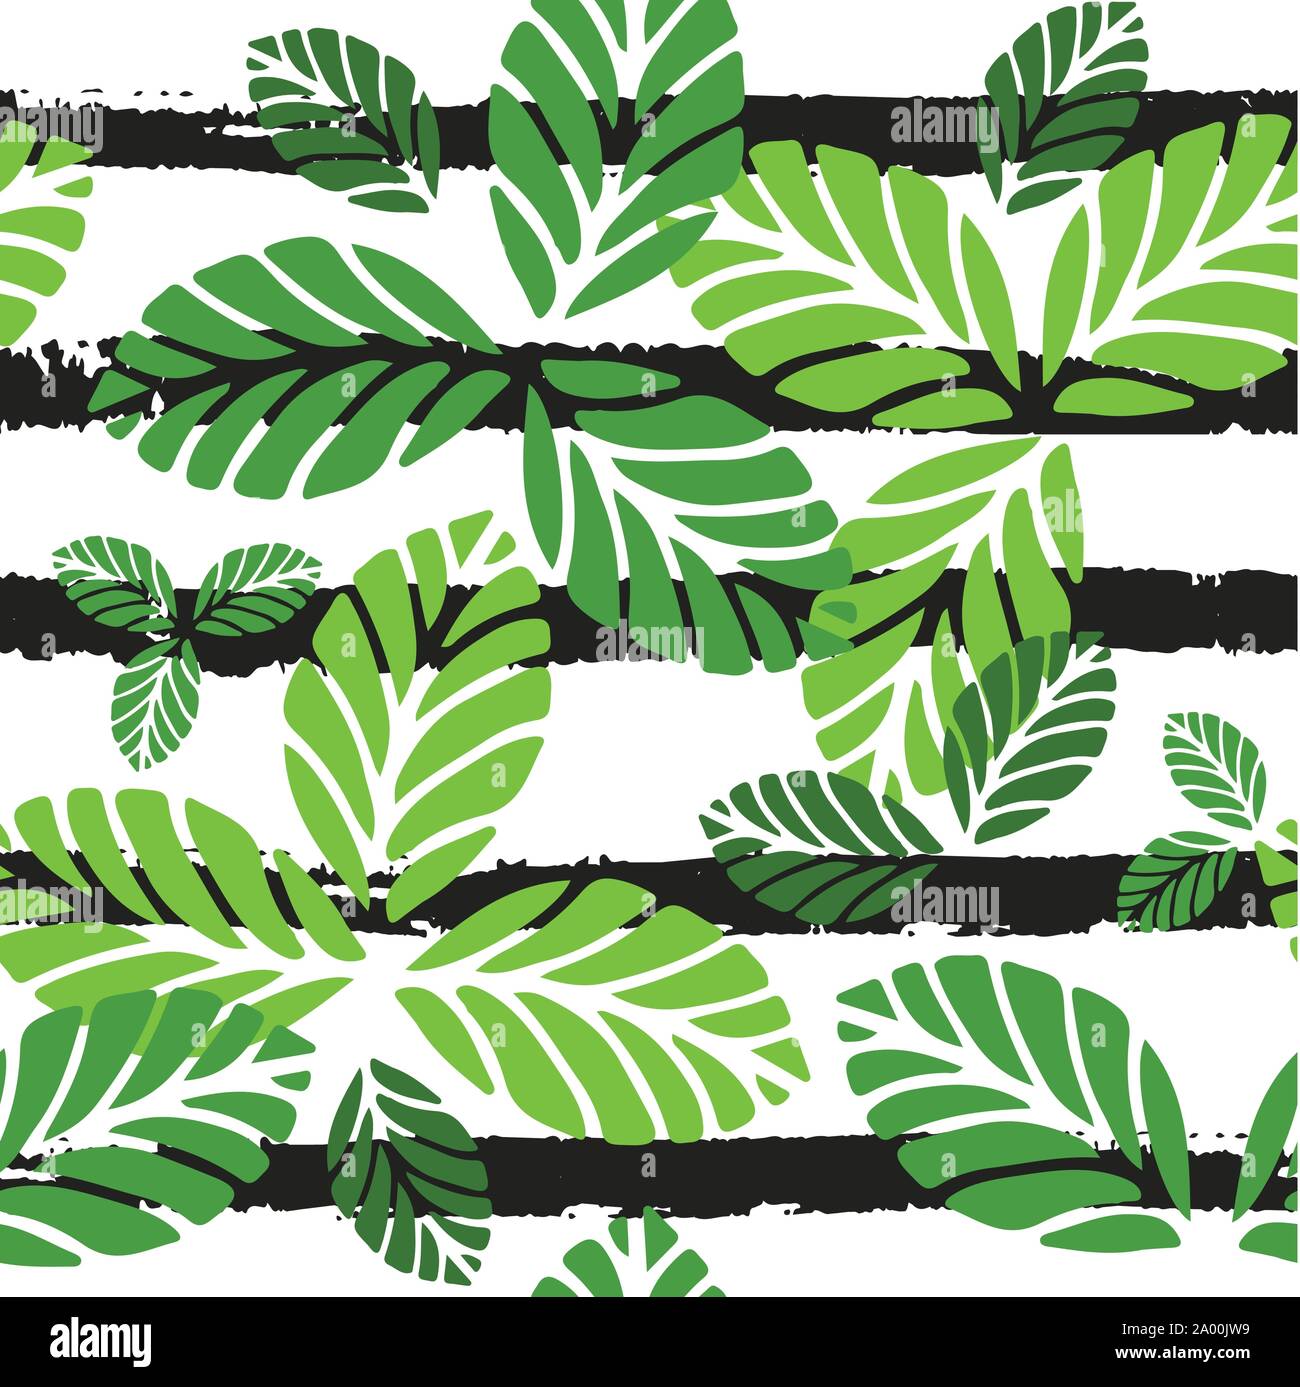 Tropical seamless pattern with green leaves Stock Vector